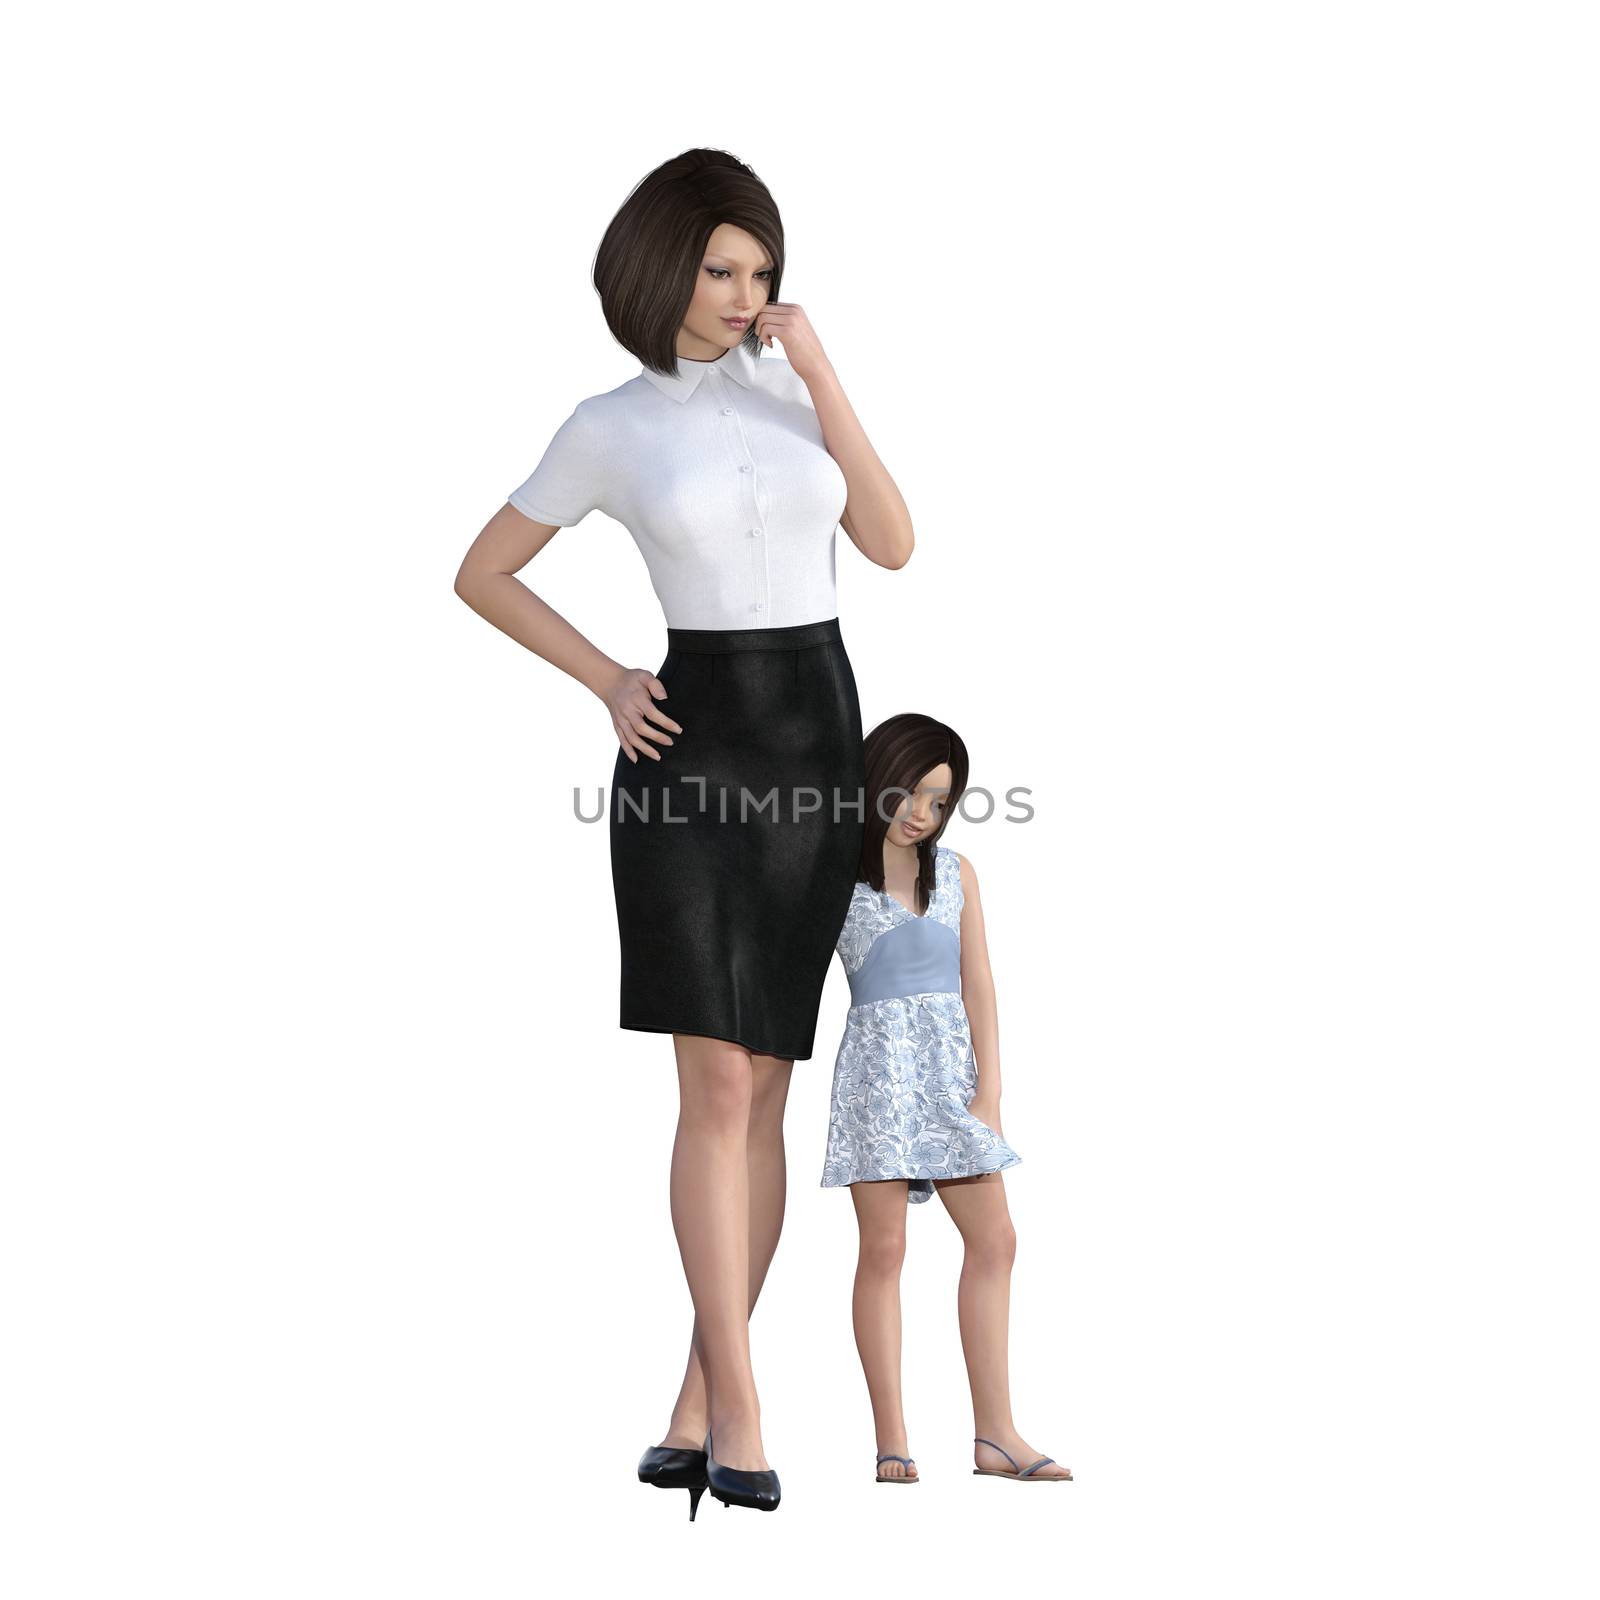 Mother Daughter Interaction of Girl Hugging Mom as an Illustration Concept